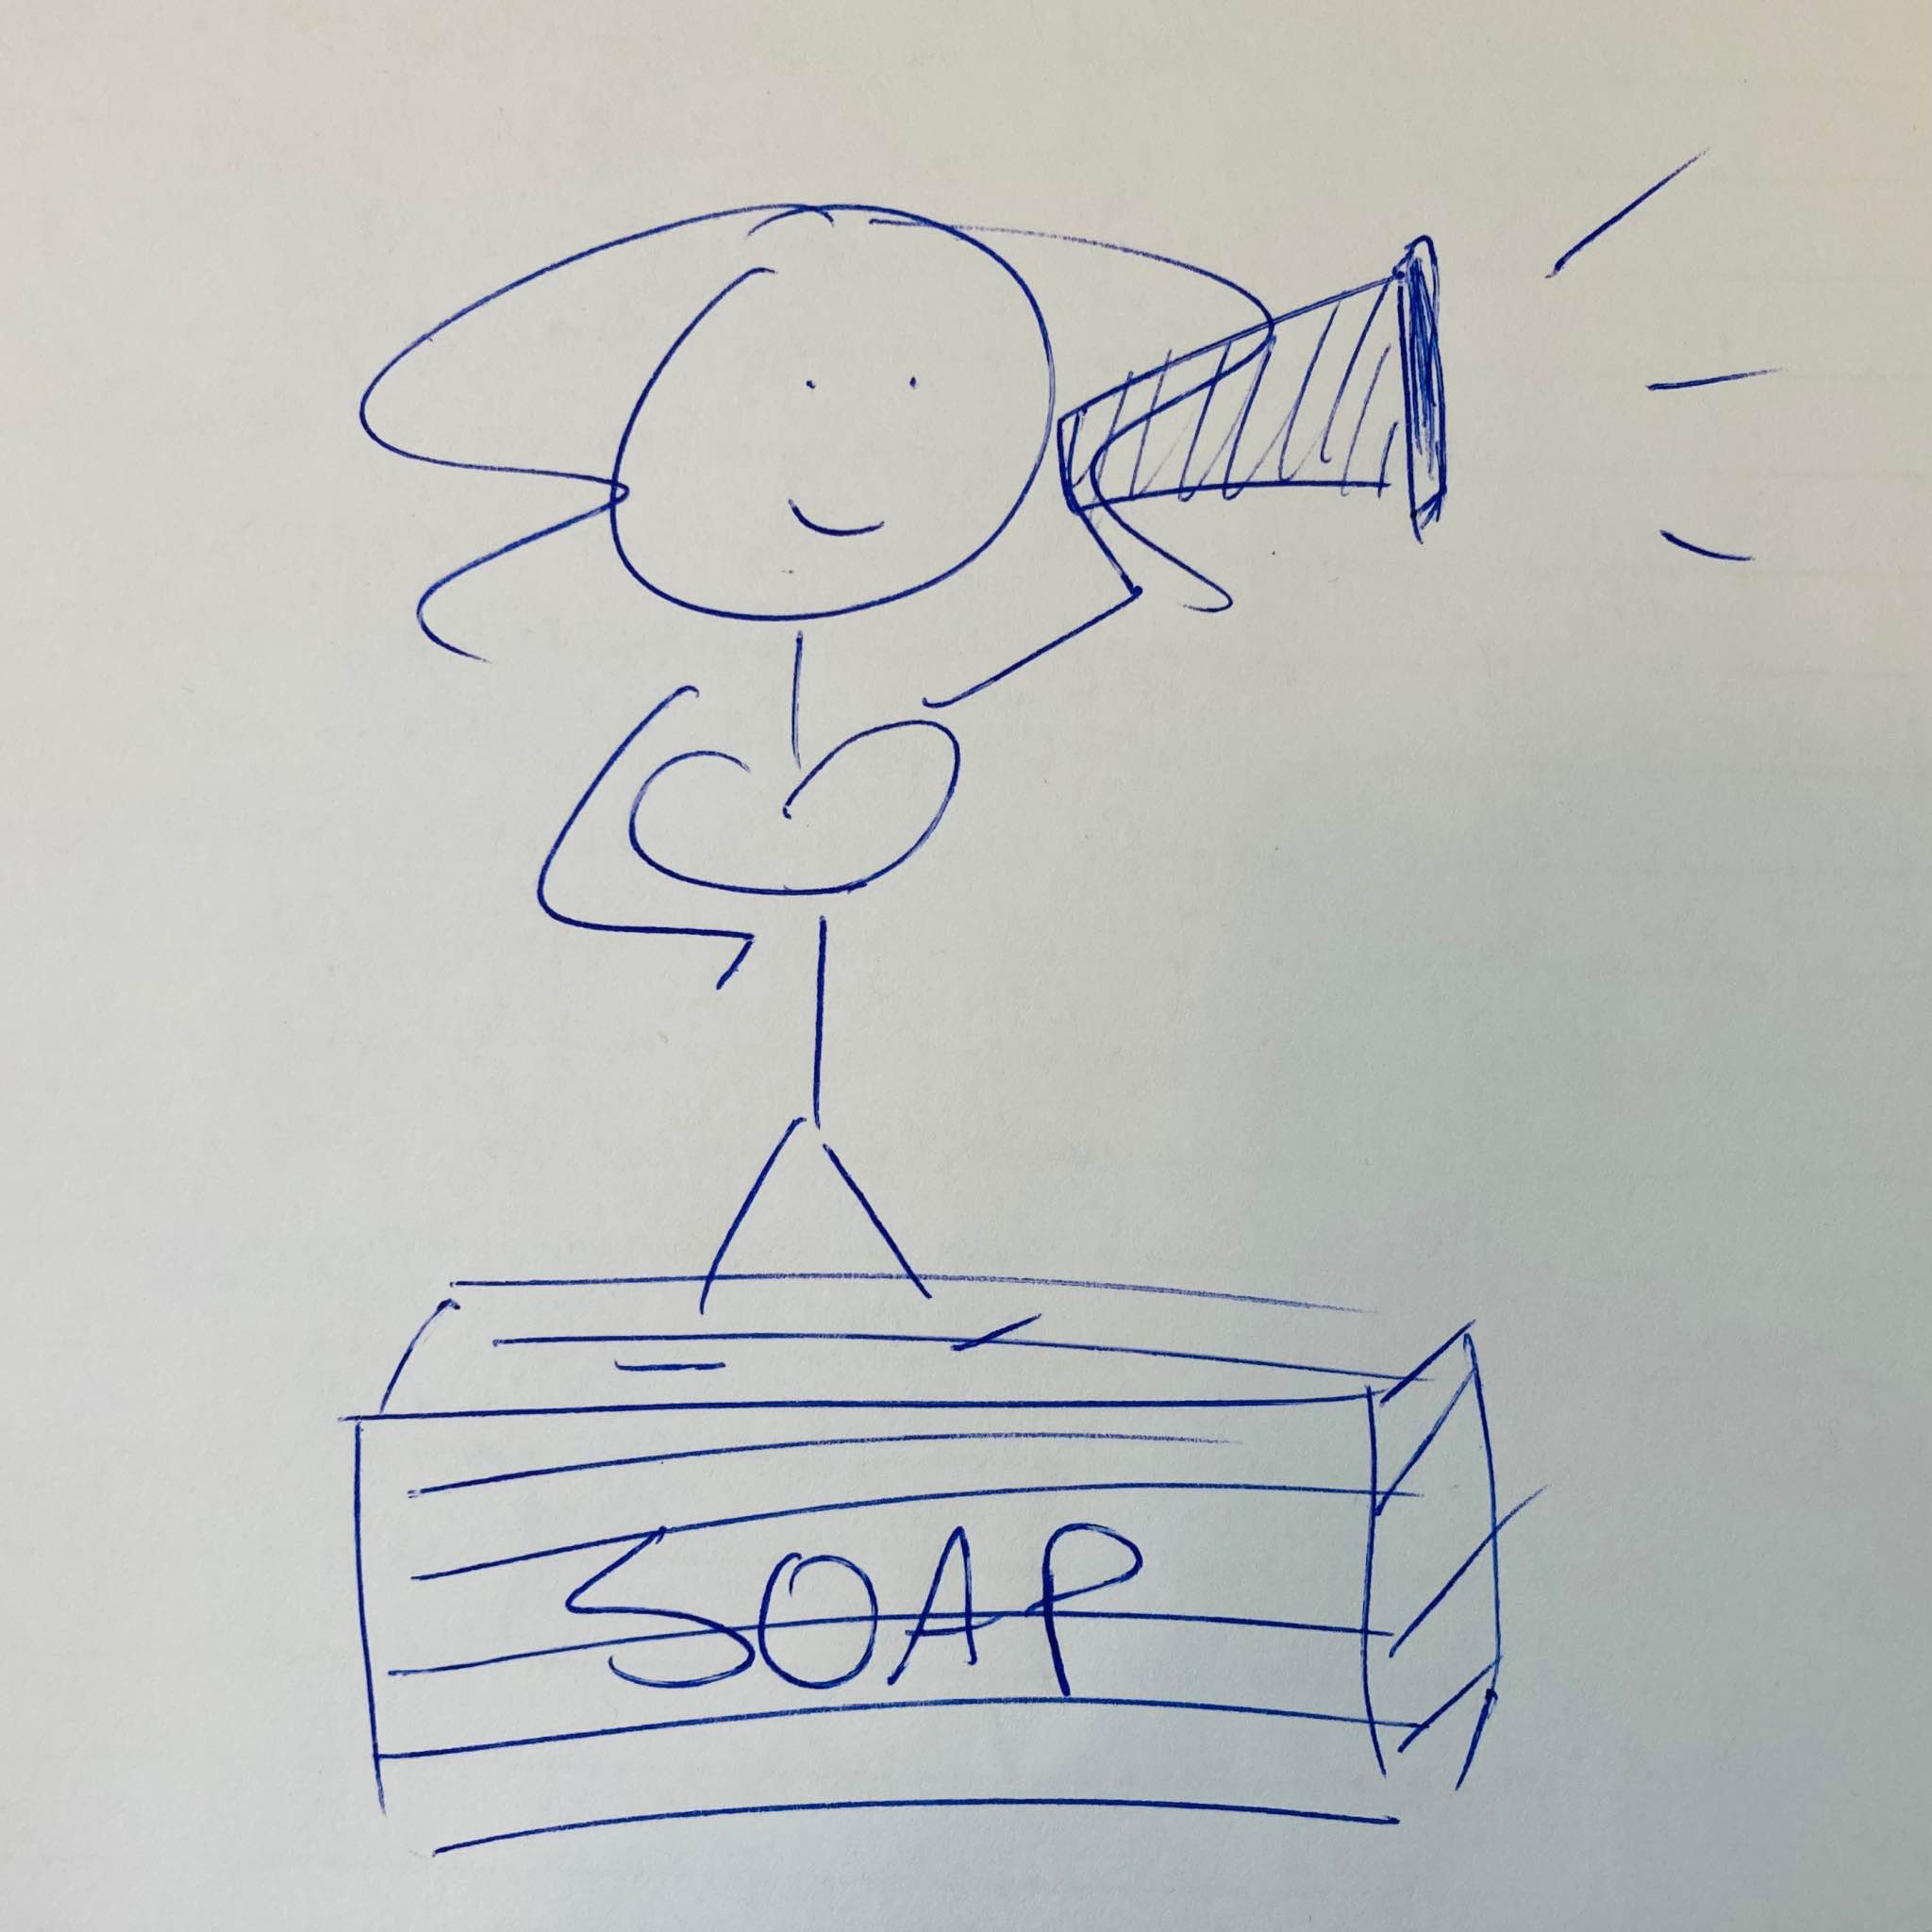 Stick-figure doodle of my alter ego Curly Girl. She is holding a megaphone and standing on a wooden box labeled SOAP.